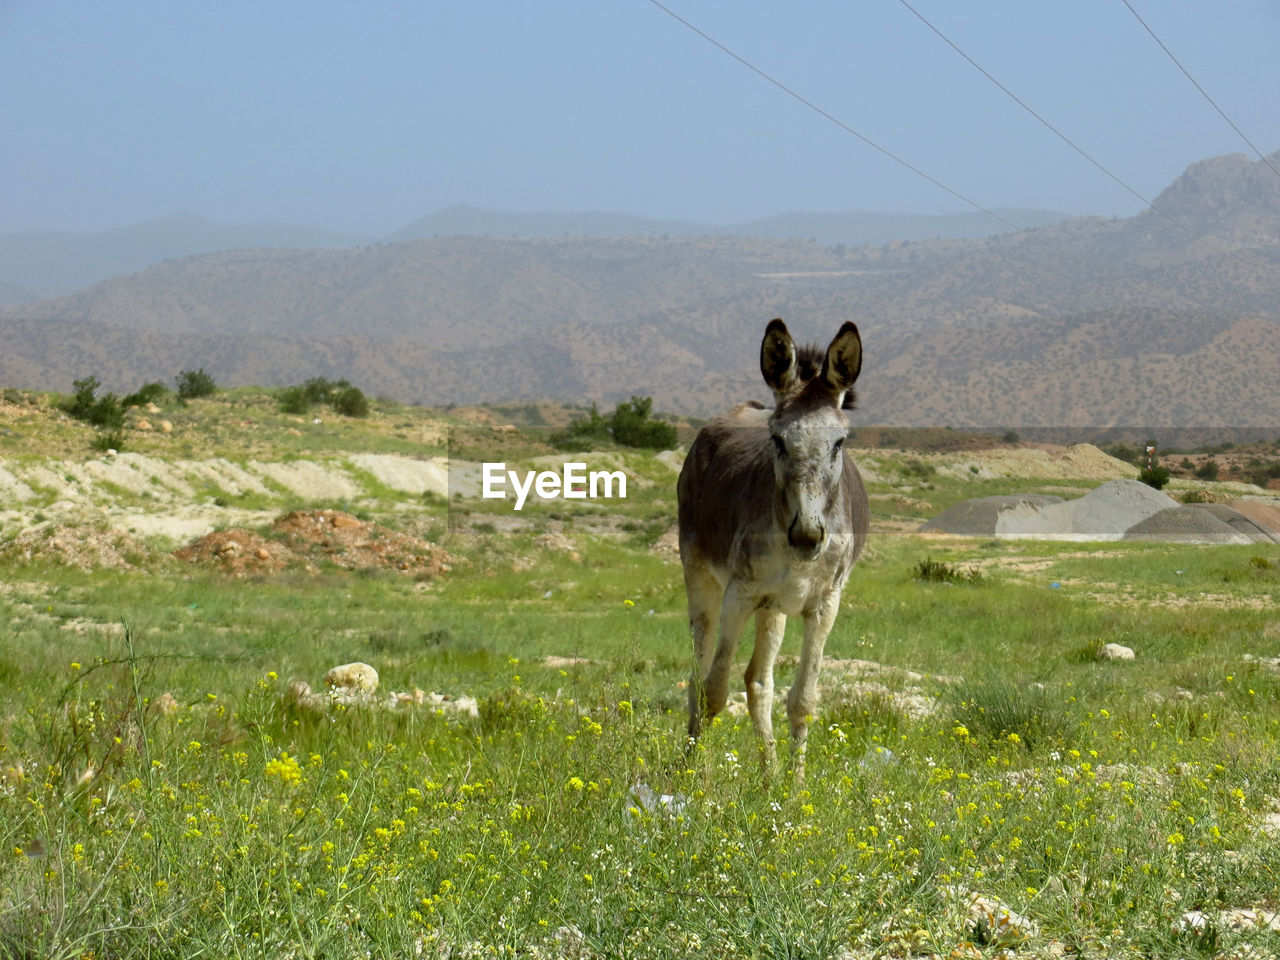 View of a donkey on field